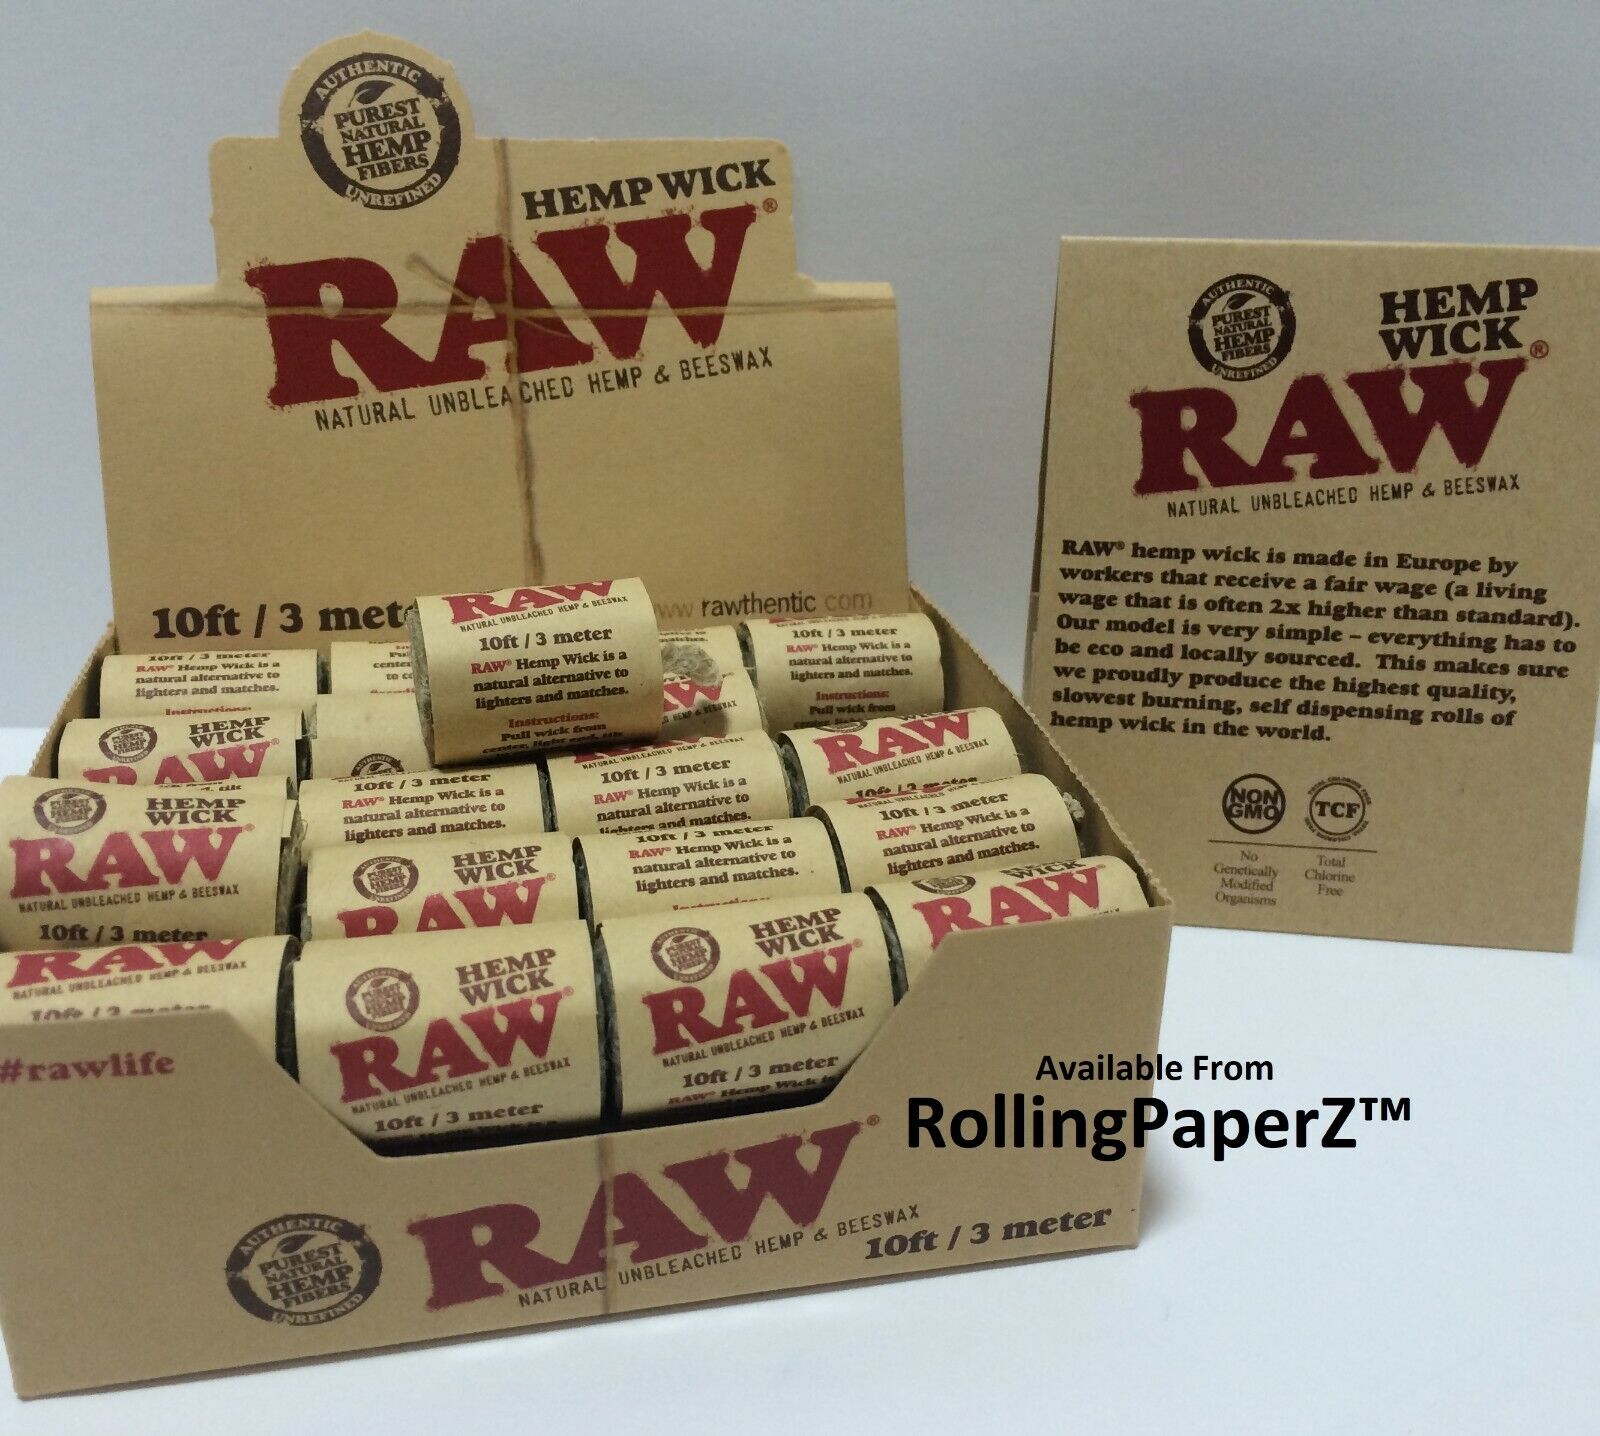 ONE ROLL 10 FEET/ 3 METER of RAW Rolling Papers HEMP WICK Natural Hemp & Beeswax